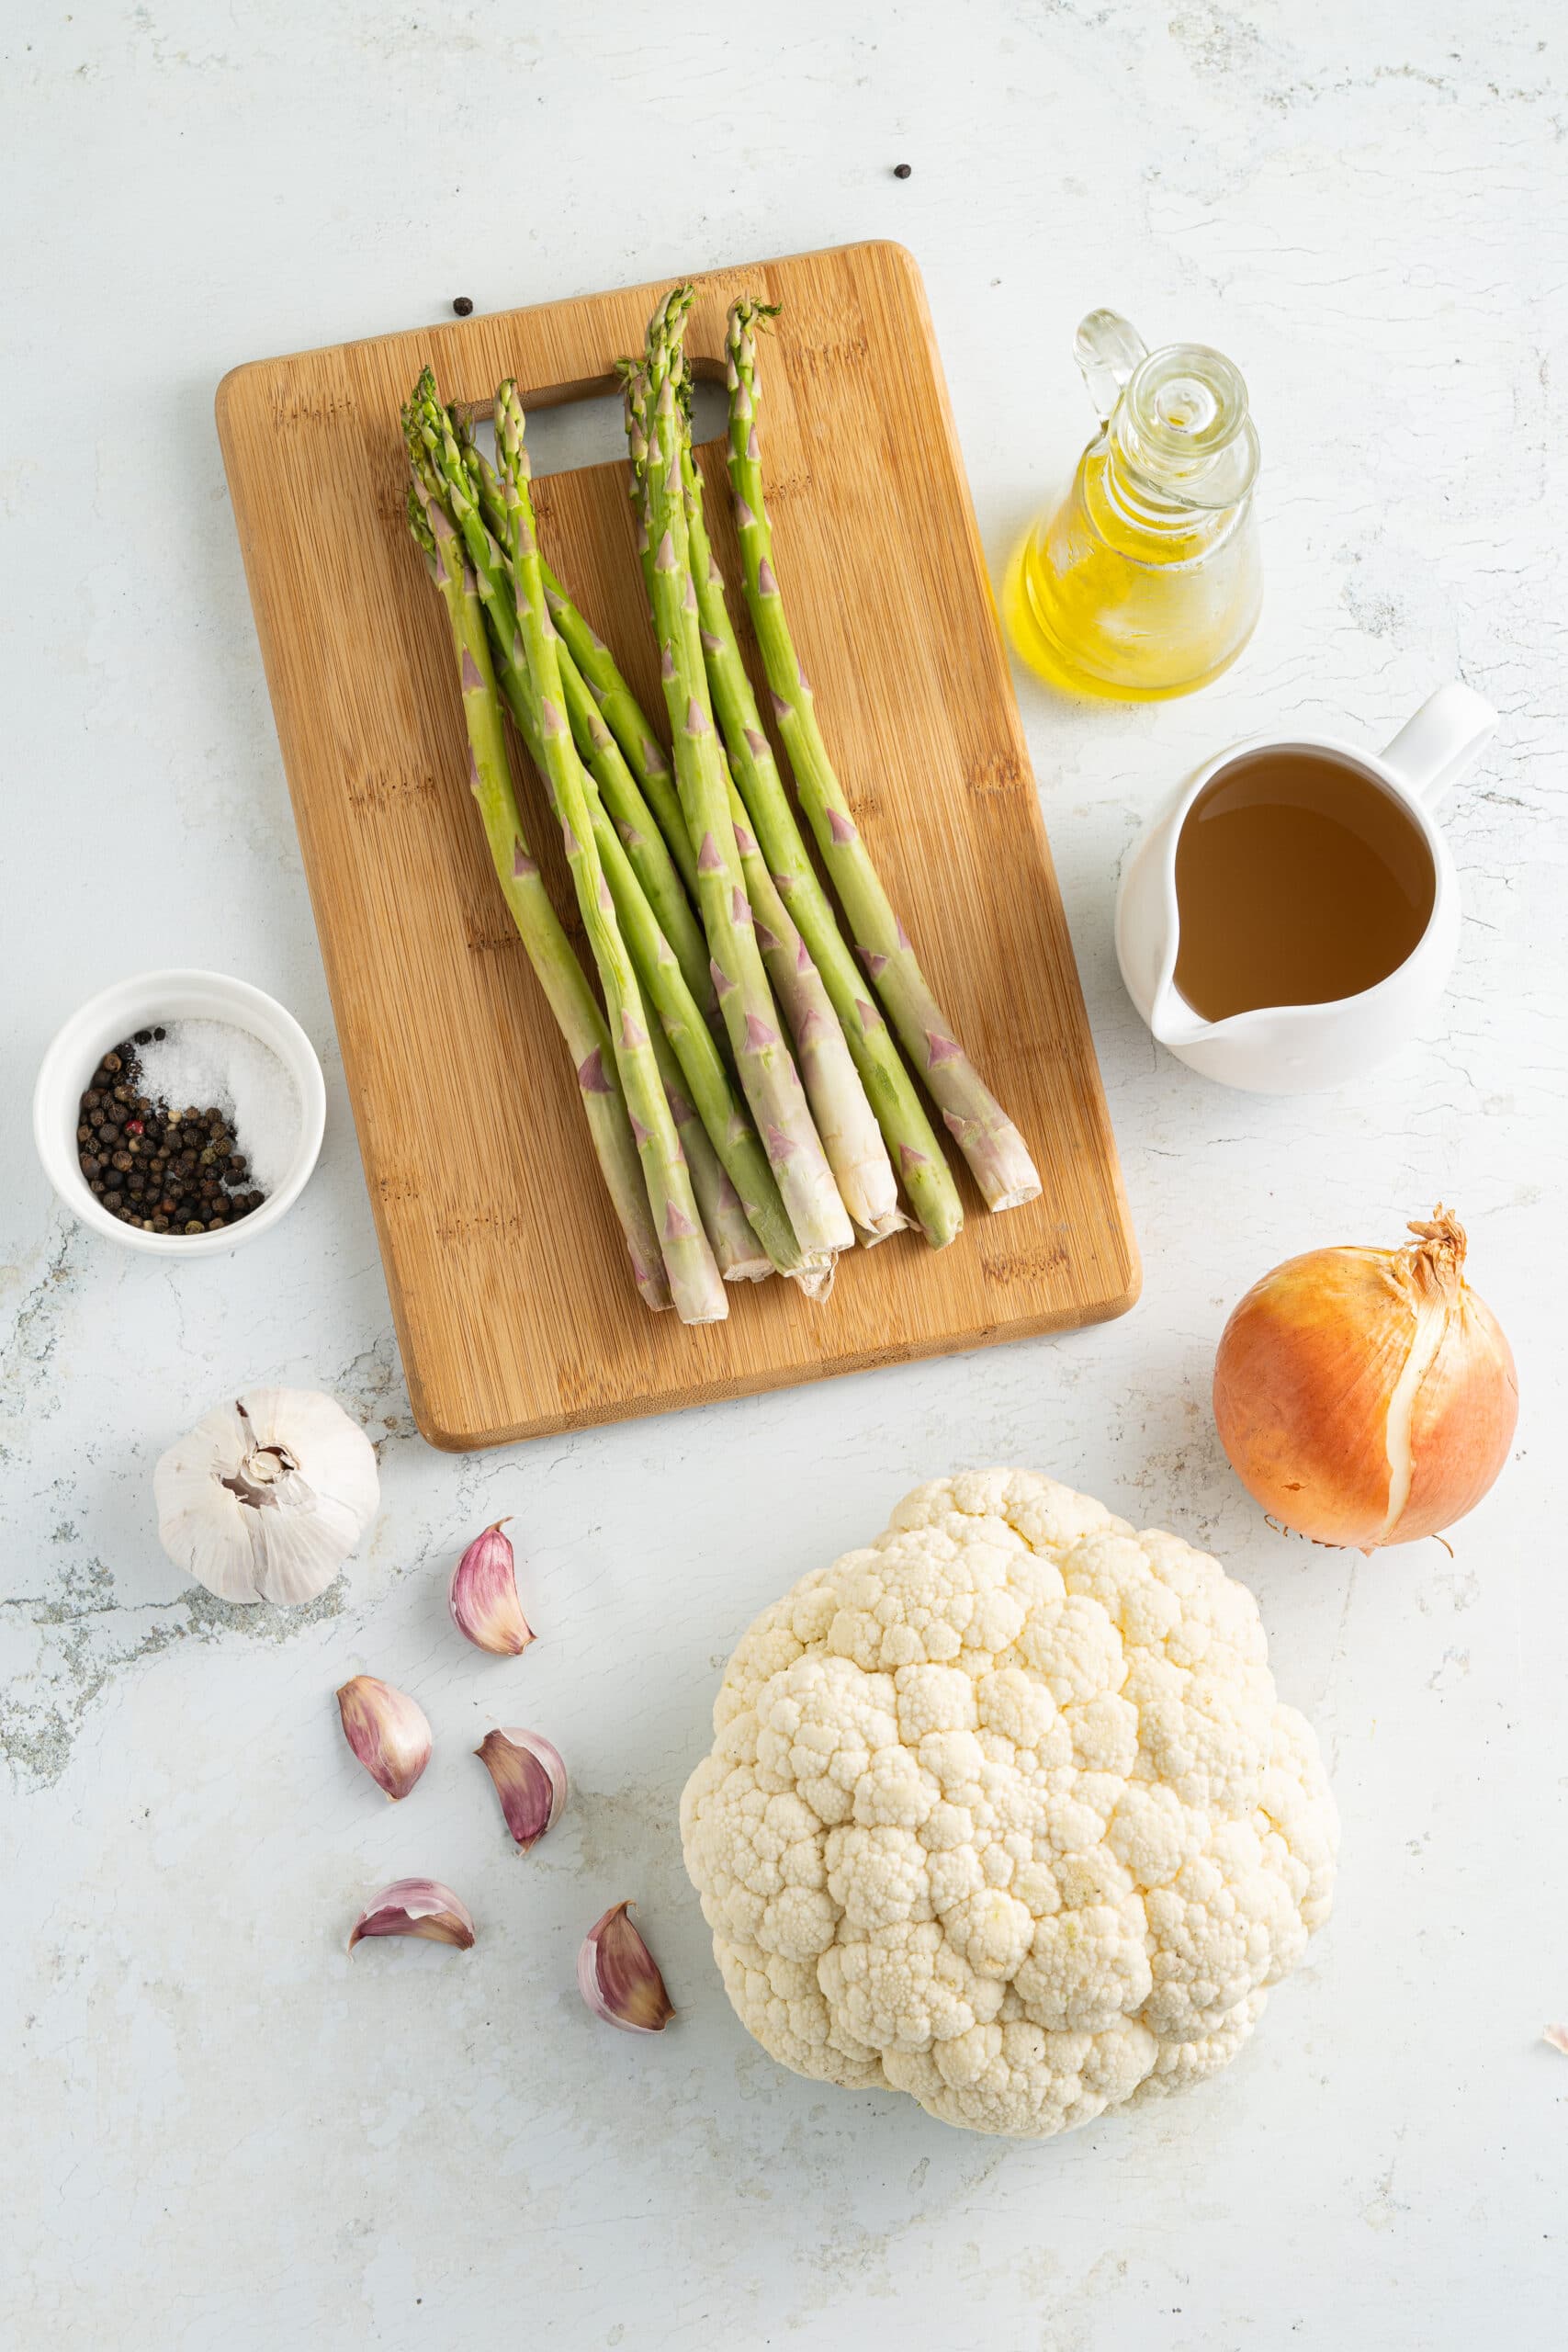 Ingredients on a white background or small white pitchers or white bowls and asparagus spears on a wood board.